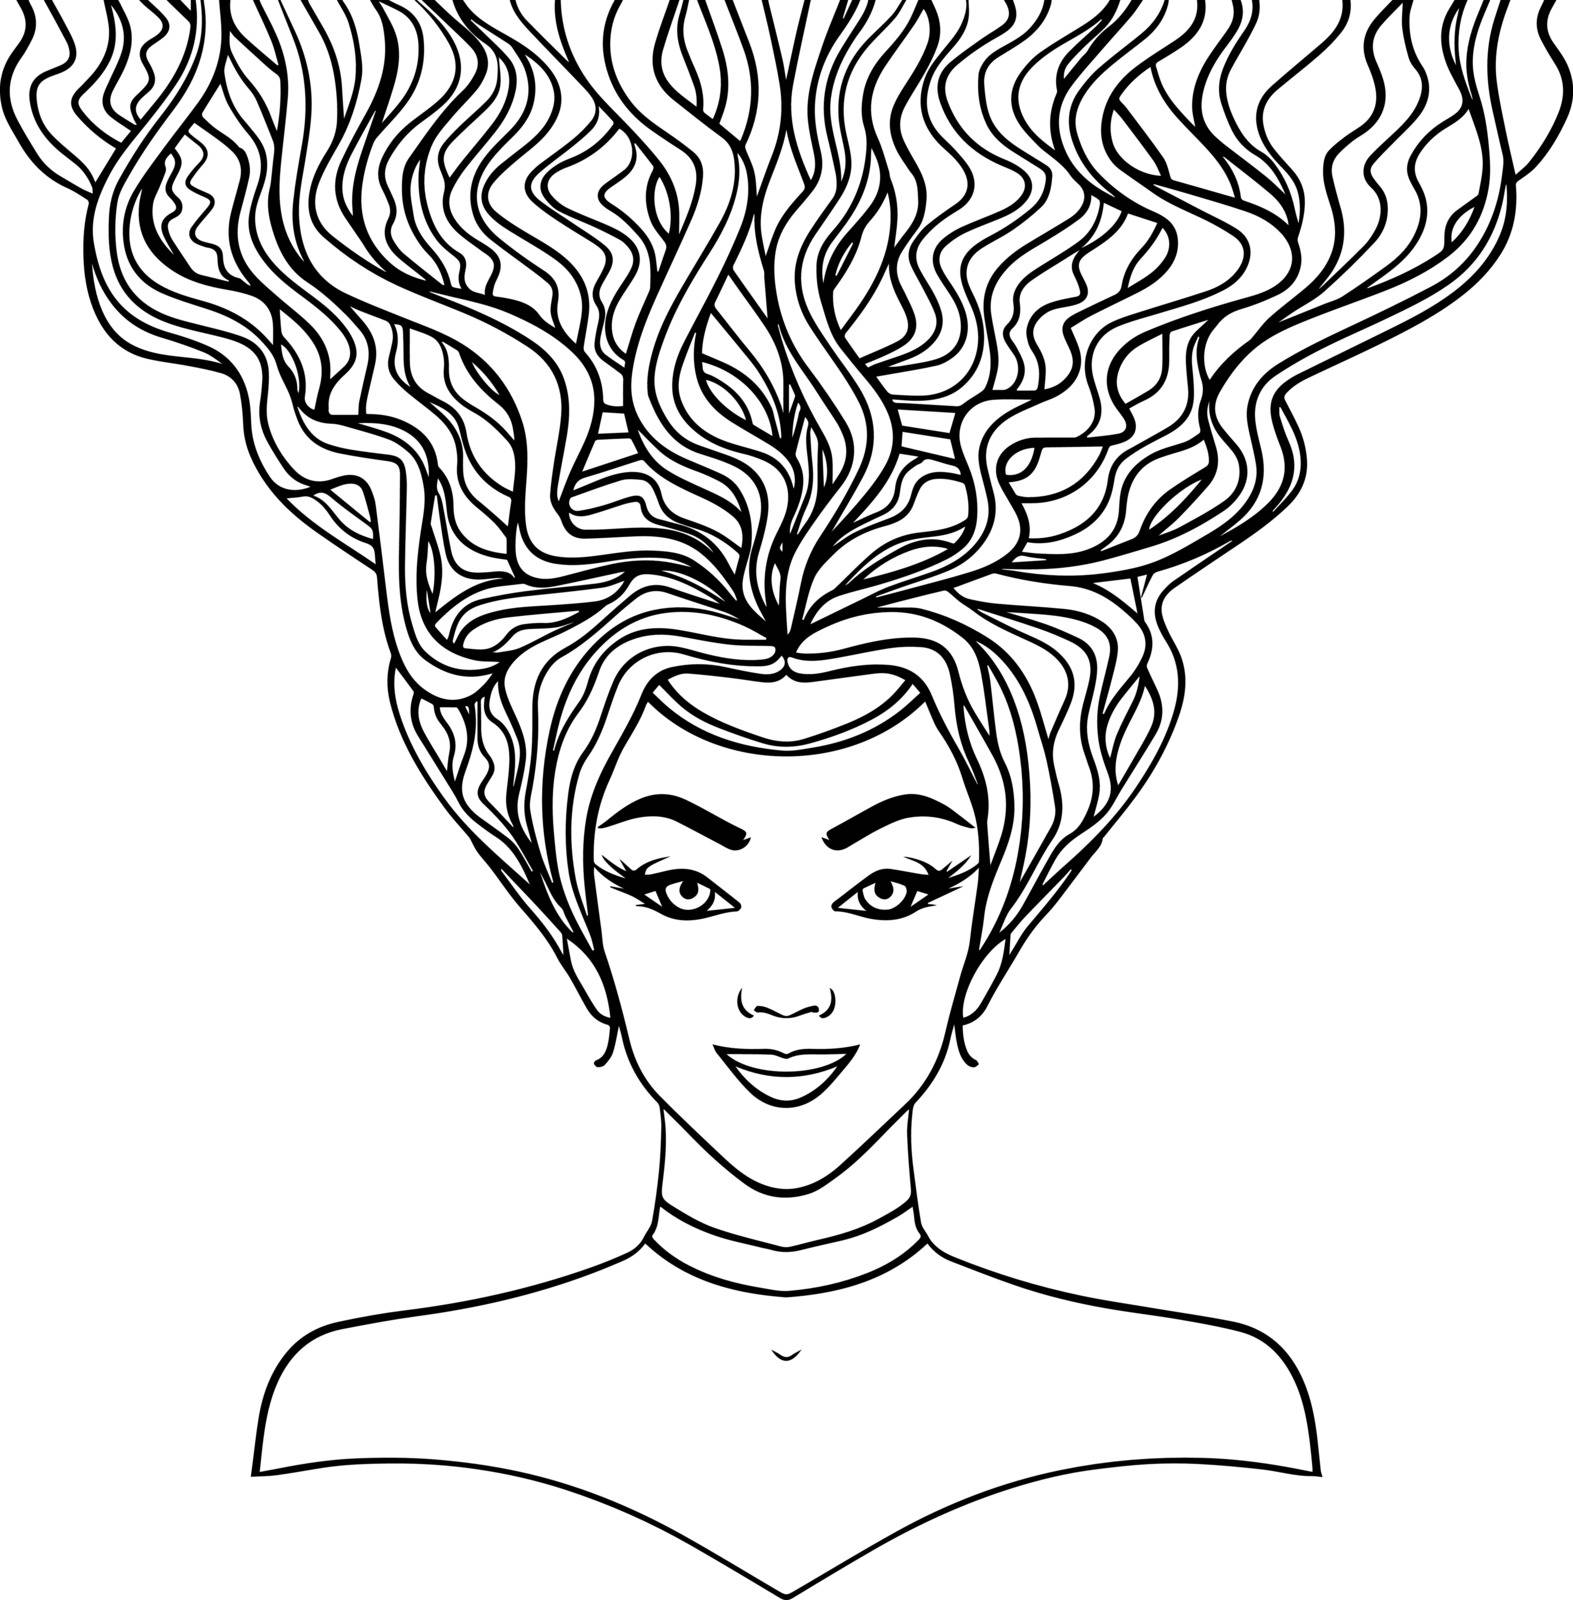 black and white vector illustration of a beautiful young woman